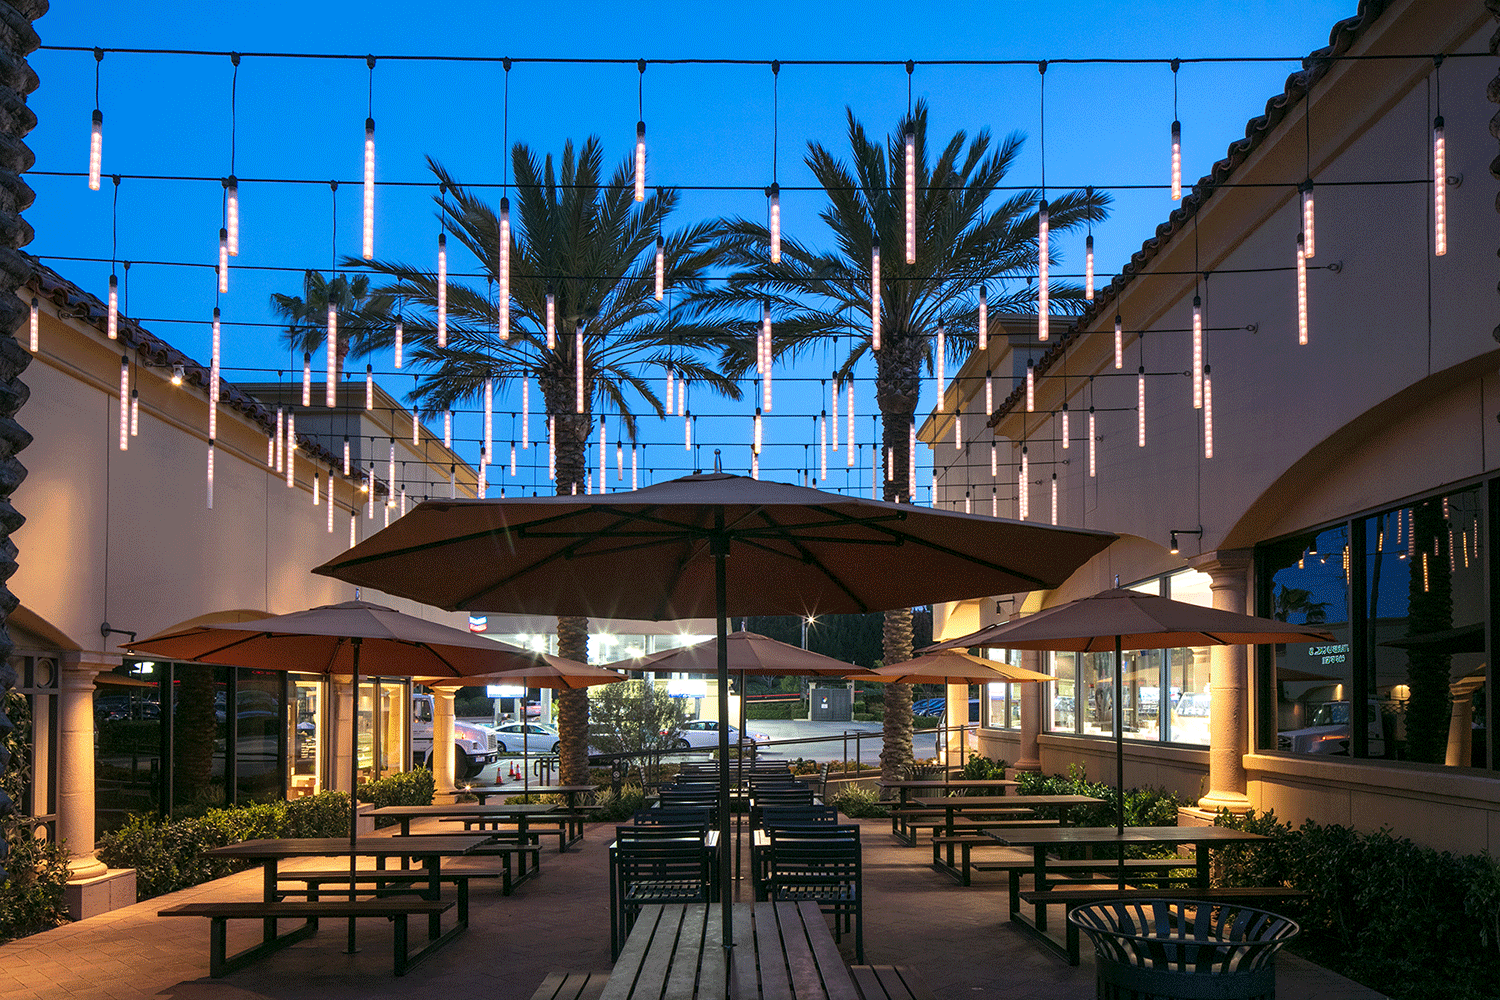  Evening view of the courtyard at Newport North Shopping Center